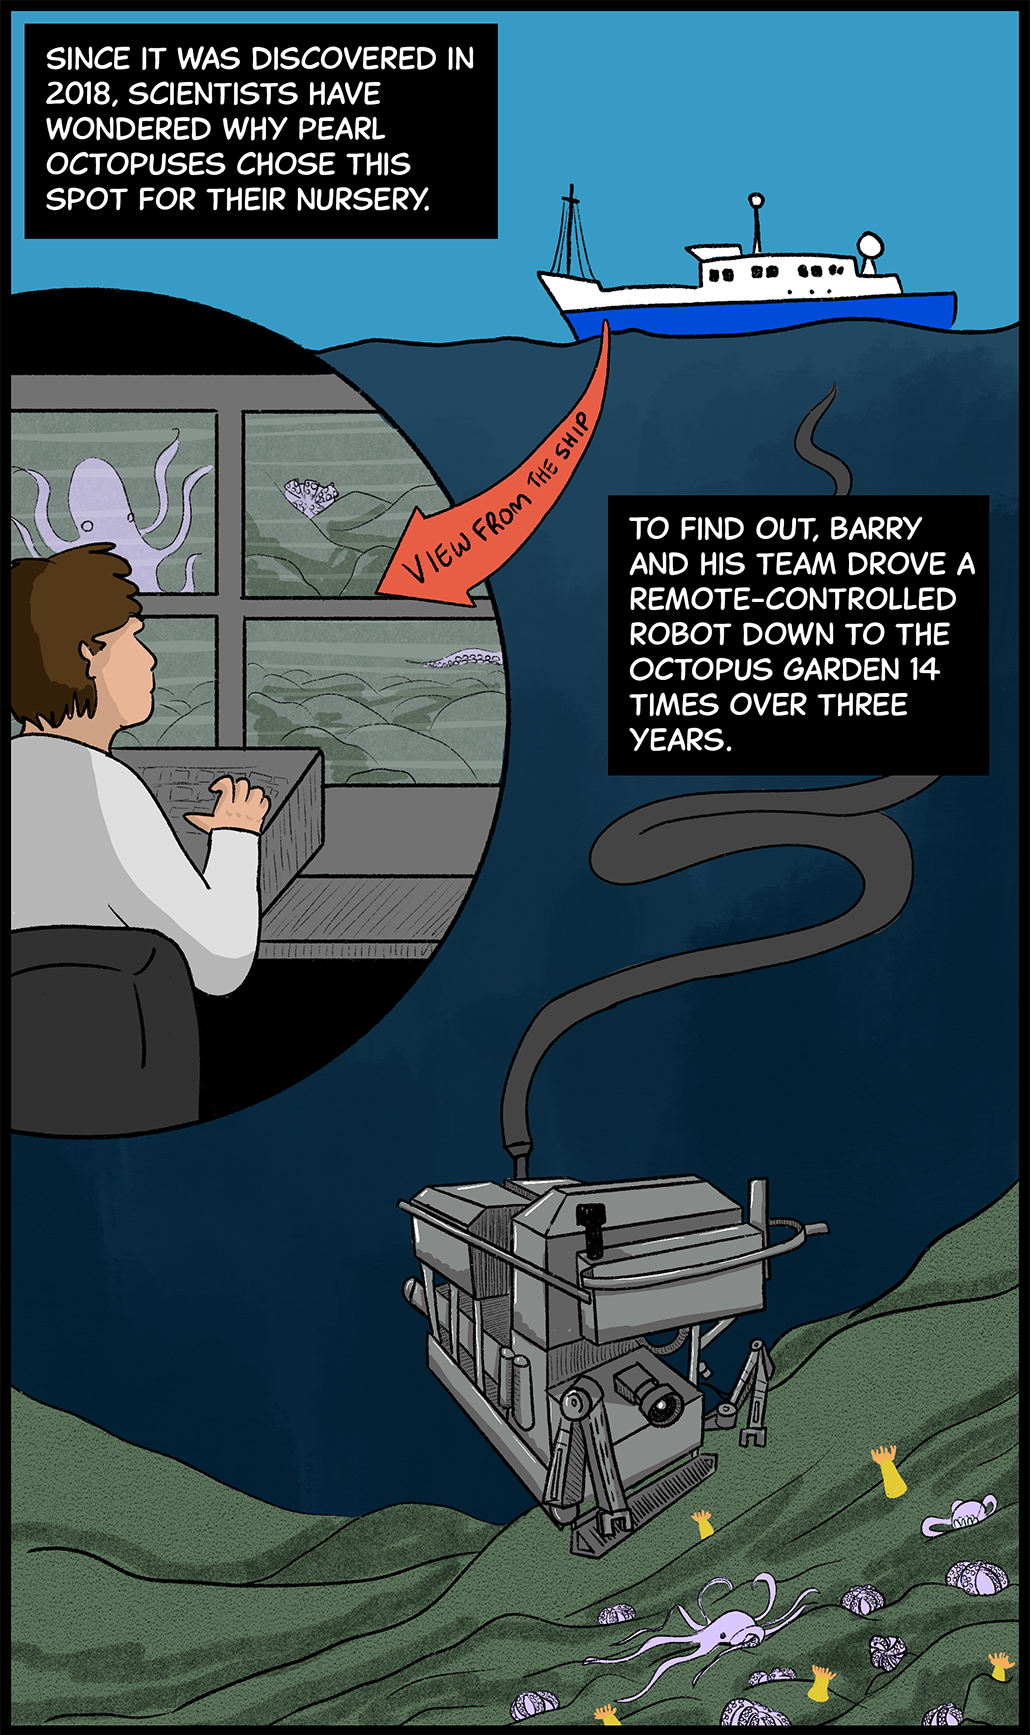 Text (above image): Since it was discovered in 2018, scientists have wondered why pearl octopuses chose this spot for their nursery. To find out, Barry and his team drove a remote-controlled robot down to the Octopus Garden 14 times over three years. Image: A boat floats atop the ocean. Connected to the boat is a cable, which runs down through the water to a robot equipped with arms and cameras. The robot’s camera is peering at purple pearl octopuses clustered on the seafloor among yellow anemones. Inset: A view of inside the ship shows a scientist peering at several screens, which show the underwater robot’s views of the octopuses on the seafloor.